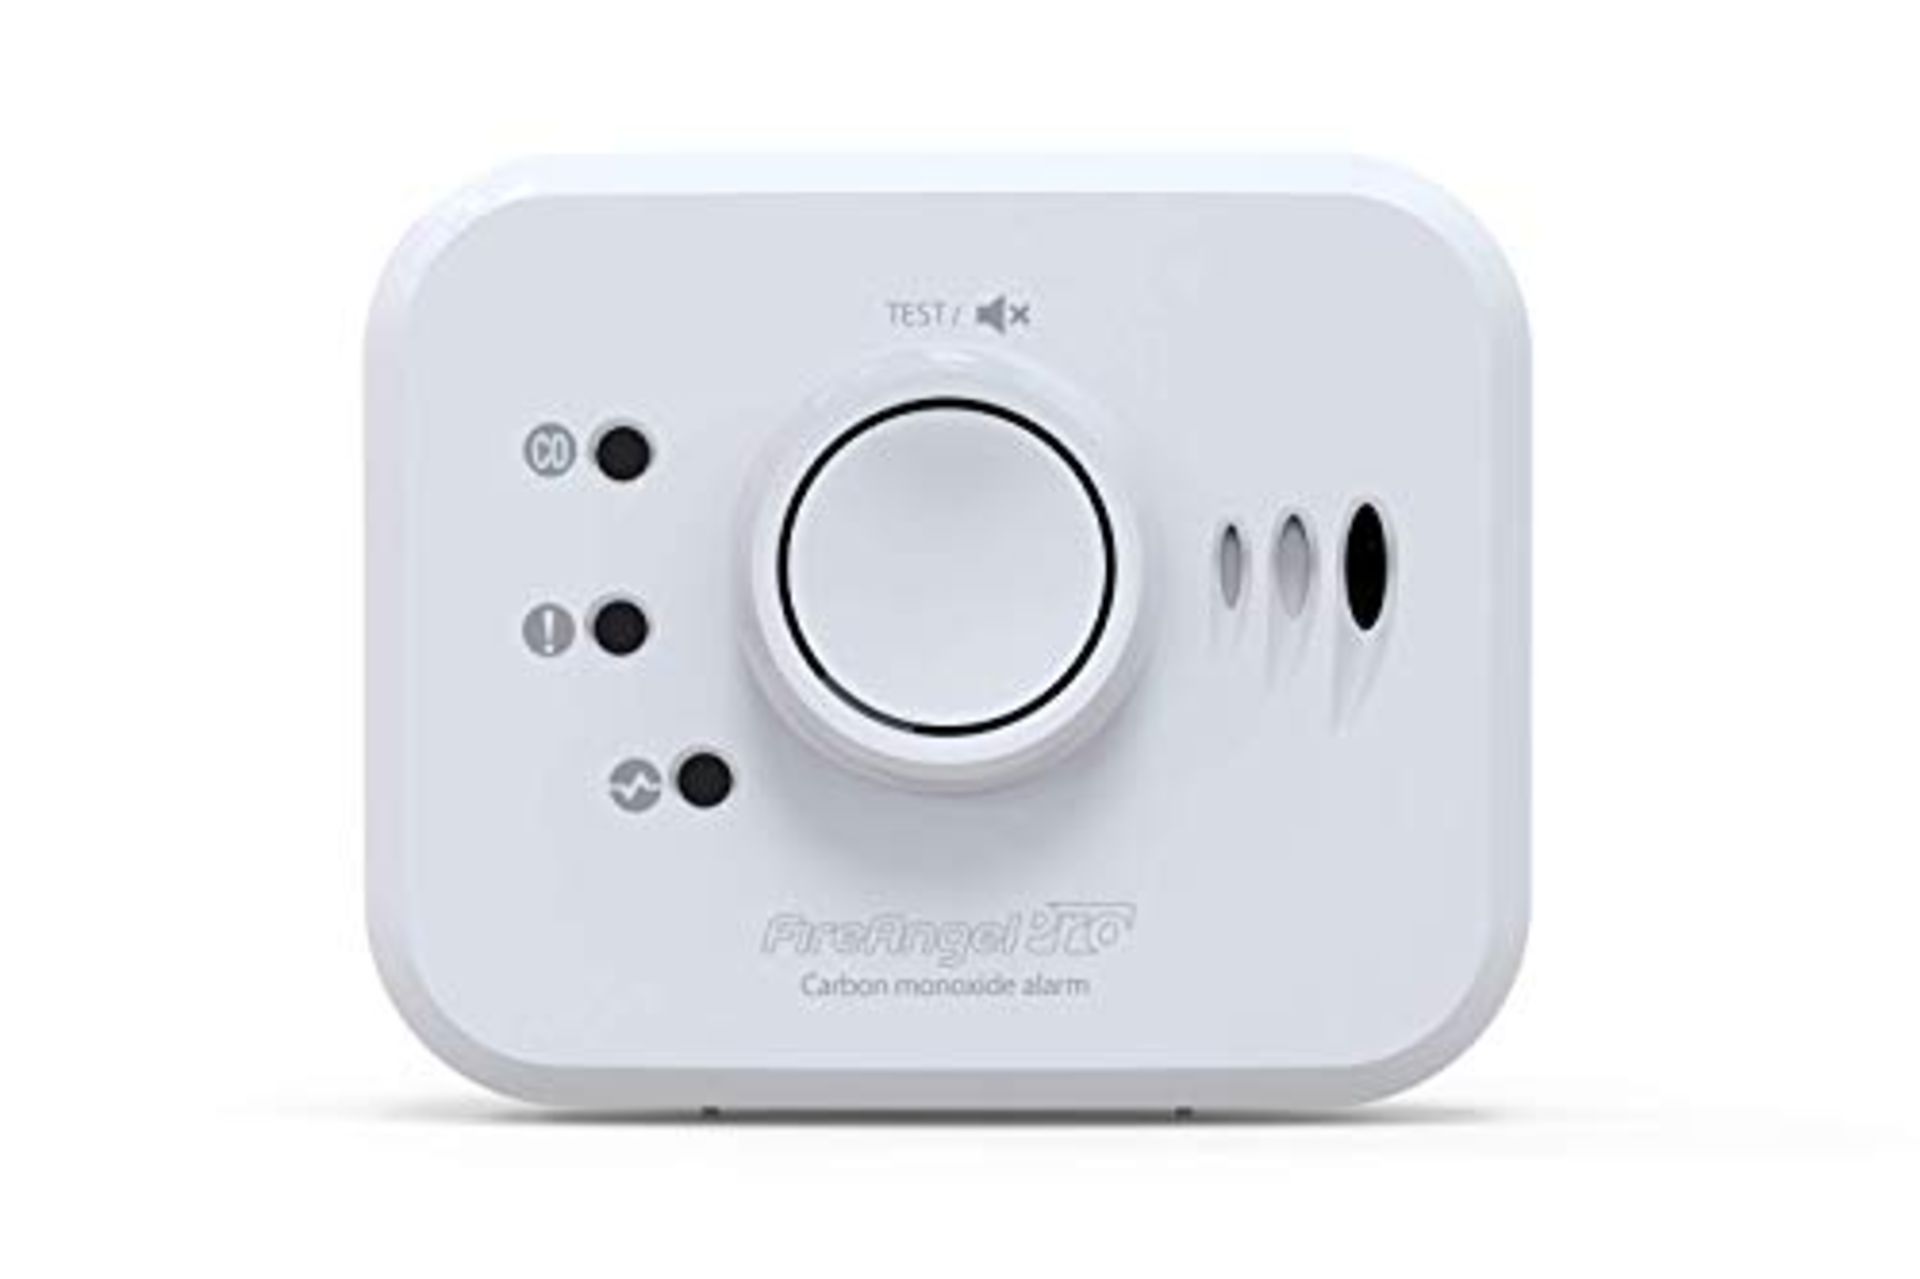 FireAngel Pro Connected Smart Carbon Monoxide Alarm, Battery Powered with Wireless Int